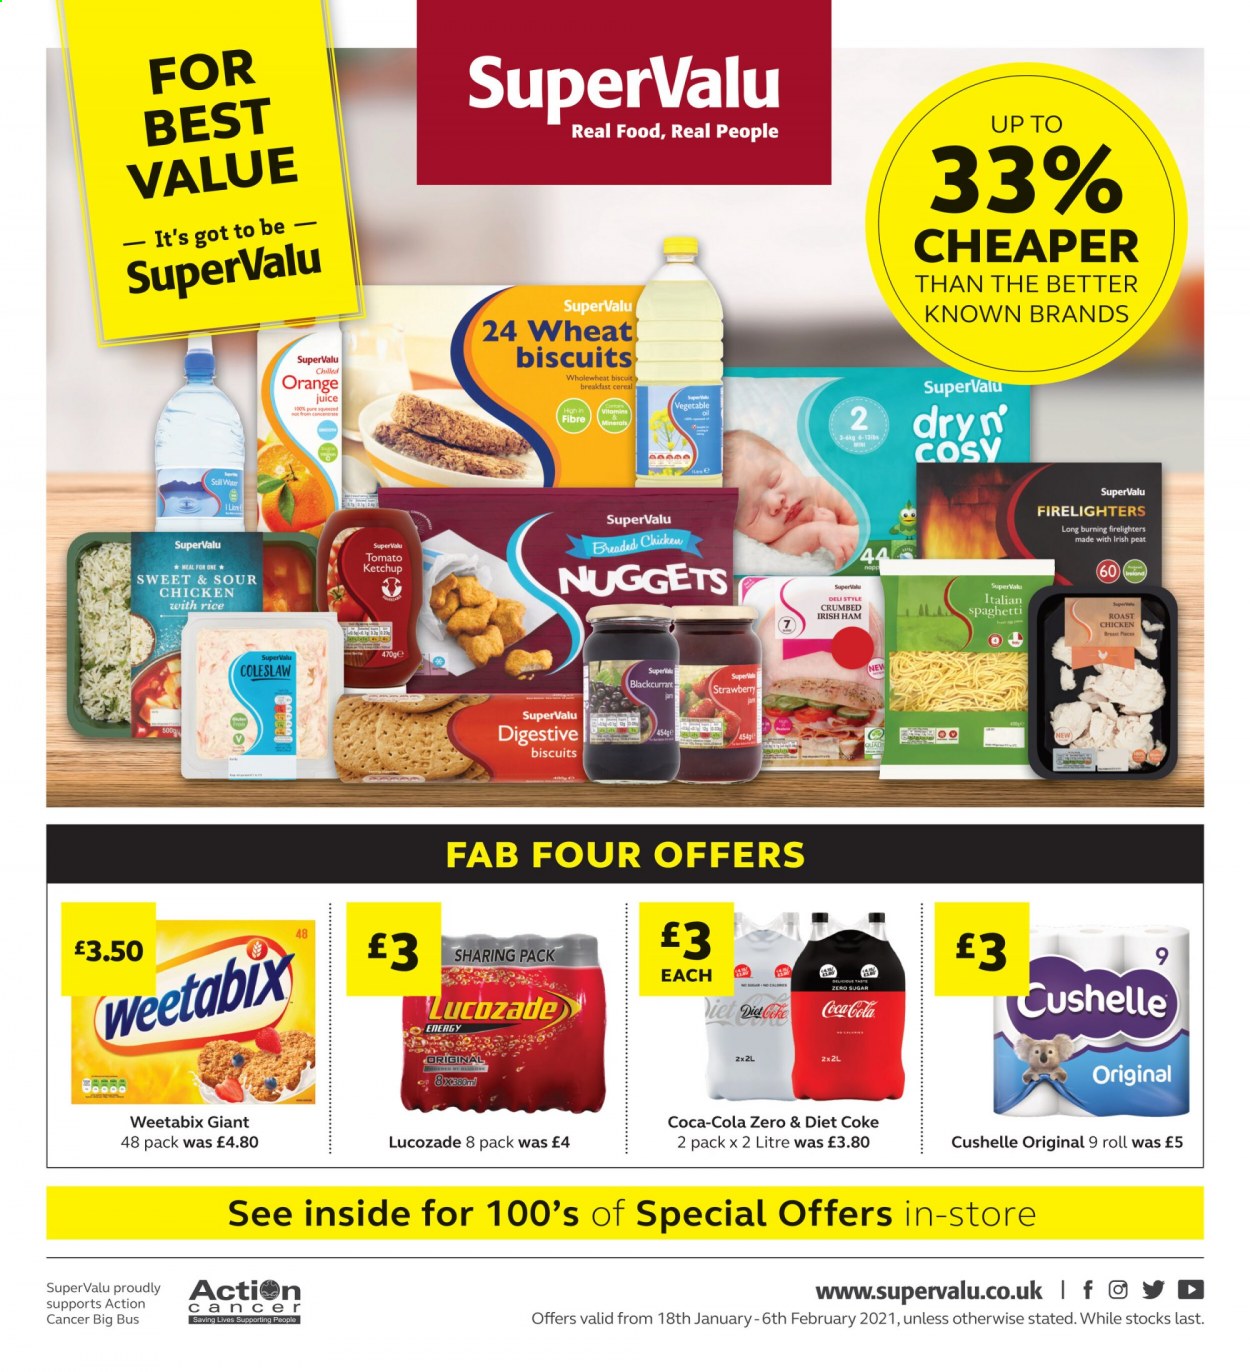 thumbnail - SuperValu offer  - 18/01/2021 - 06/02/2021 - Sales products - chicken breasts, chicken roast, nuggets, chicken, coleslaw, fried chicken, ham, biscuit, Digestive, cereals, Weetabix, spaghetti, ketchup, vegetable oil, fruit jam, Coca-Cola, orange juice, juice, Coca-Cola zero, Diet Coke, Lucozade, mineral water, Fab, firelighter. Page 1.